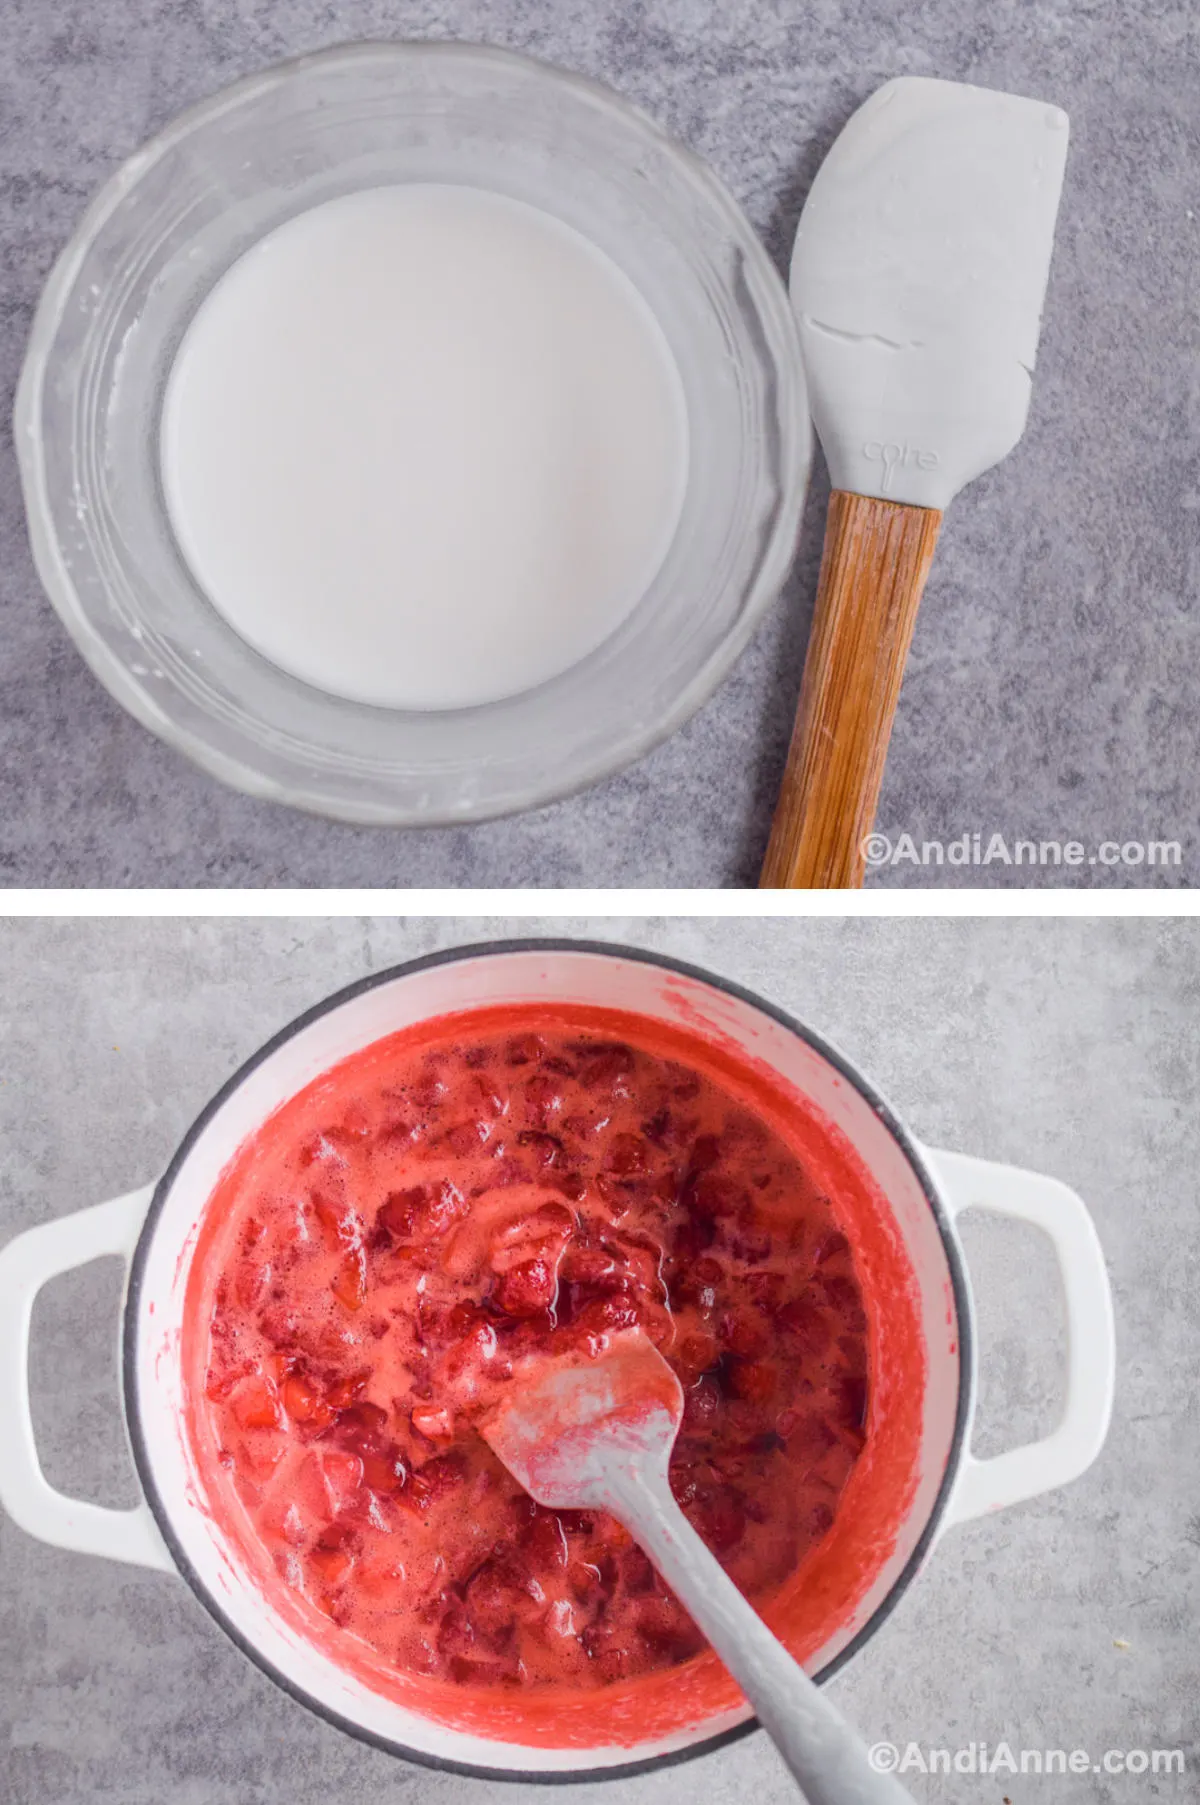 Two overhead images in one: 1. Cornstarch and water in a clear bowl. 2. Cornstarch mixture added to strawberries in pot. 